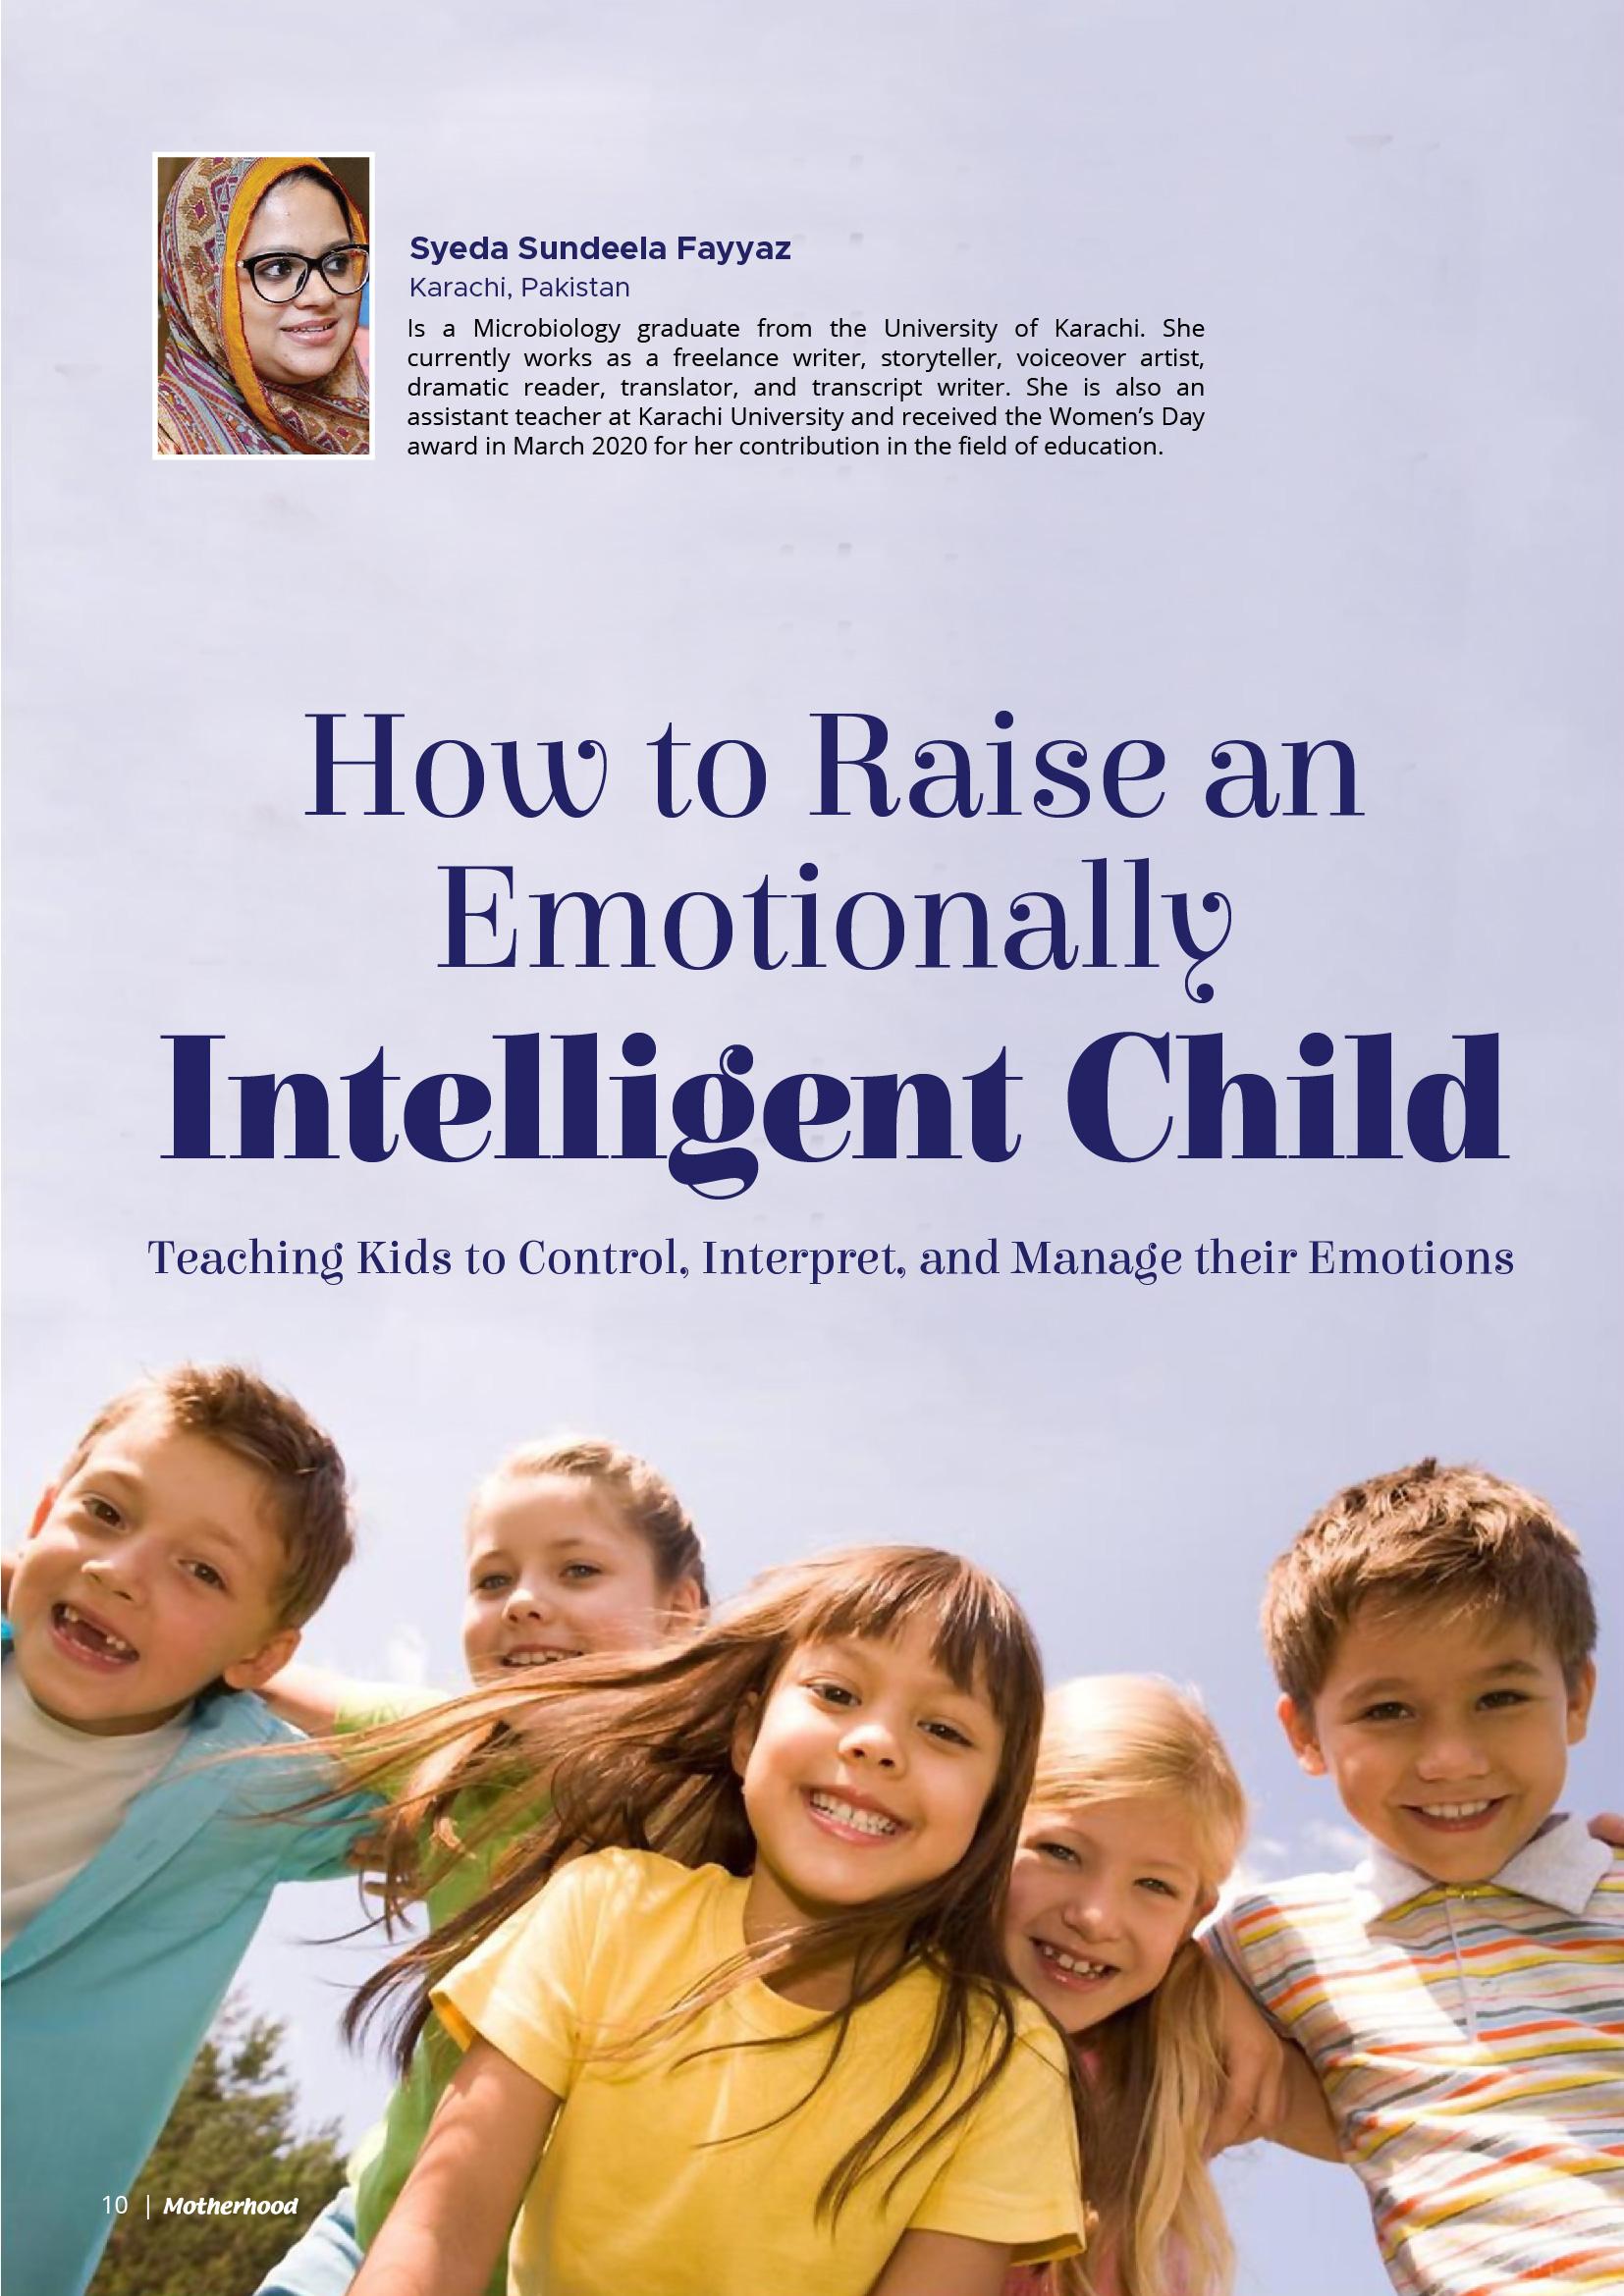 How to Raise an Emotionally Intelligent Child